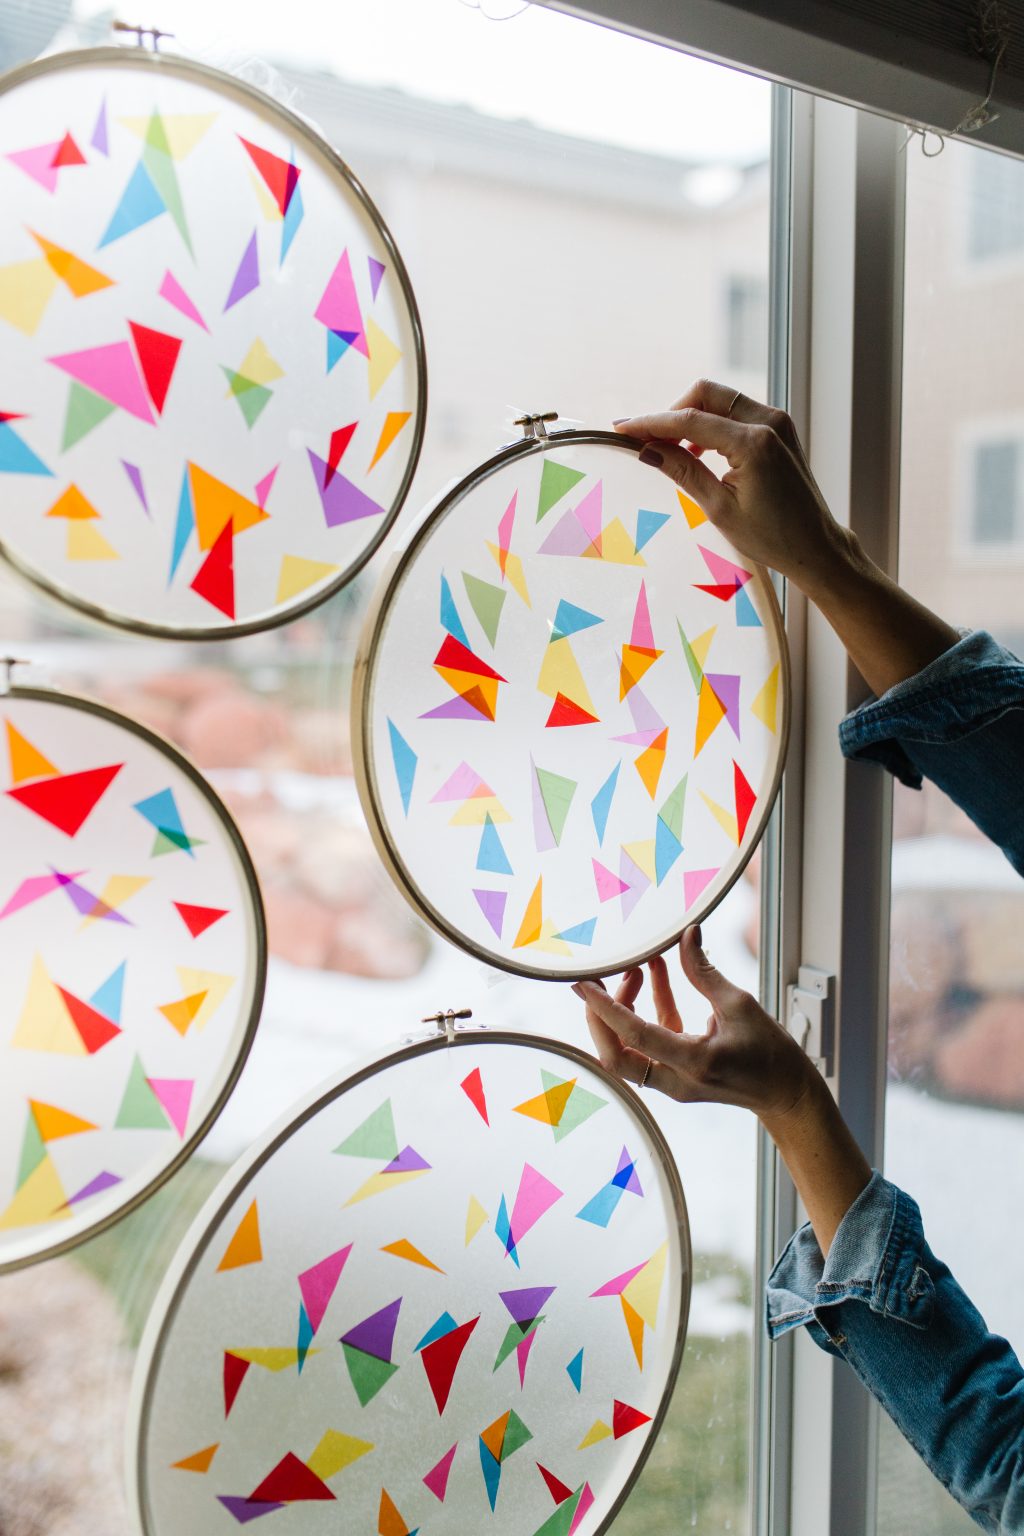 DIY stained glass - Gathered